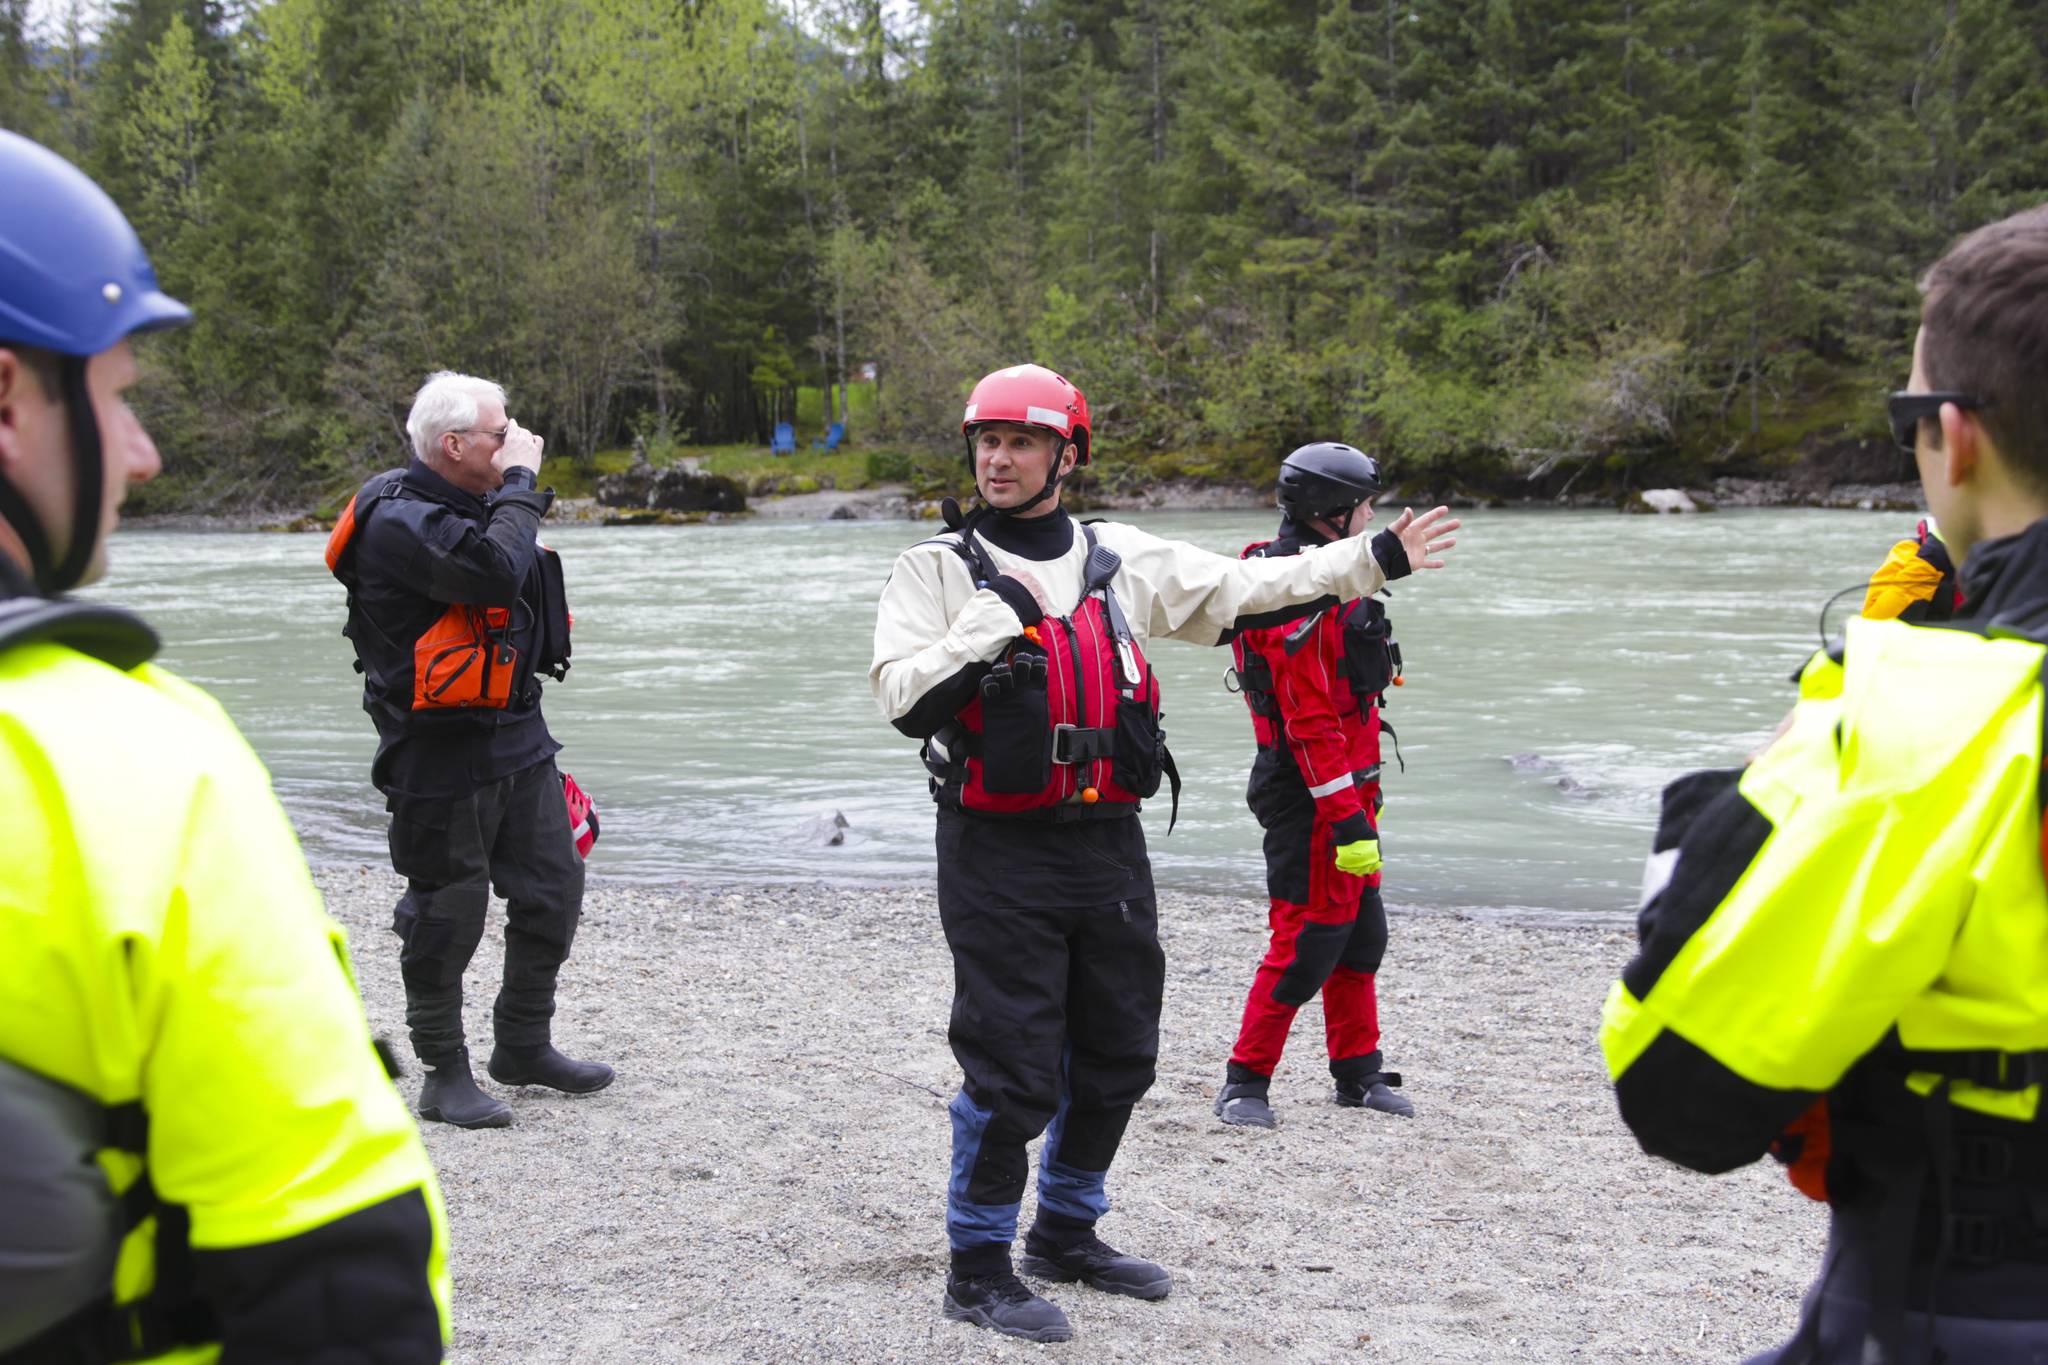 Capt. Jayme Johns, center, head of the Capital City Fire/Rescue’s water rescue team, briefs a group of CCFR personnel and Coast Guardsmen as they prepare to practice swiftwater rescues in the Mendenhall River on as National Boating Safety Week wraps up May 27, 2021. (Michael S. Lockett / Juneau Empire)